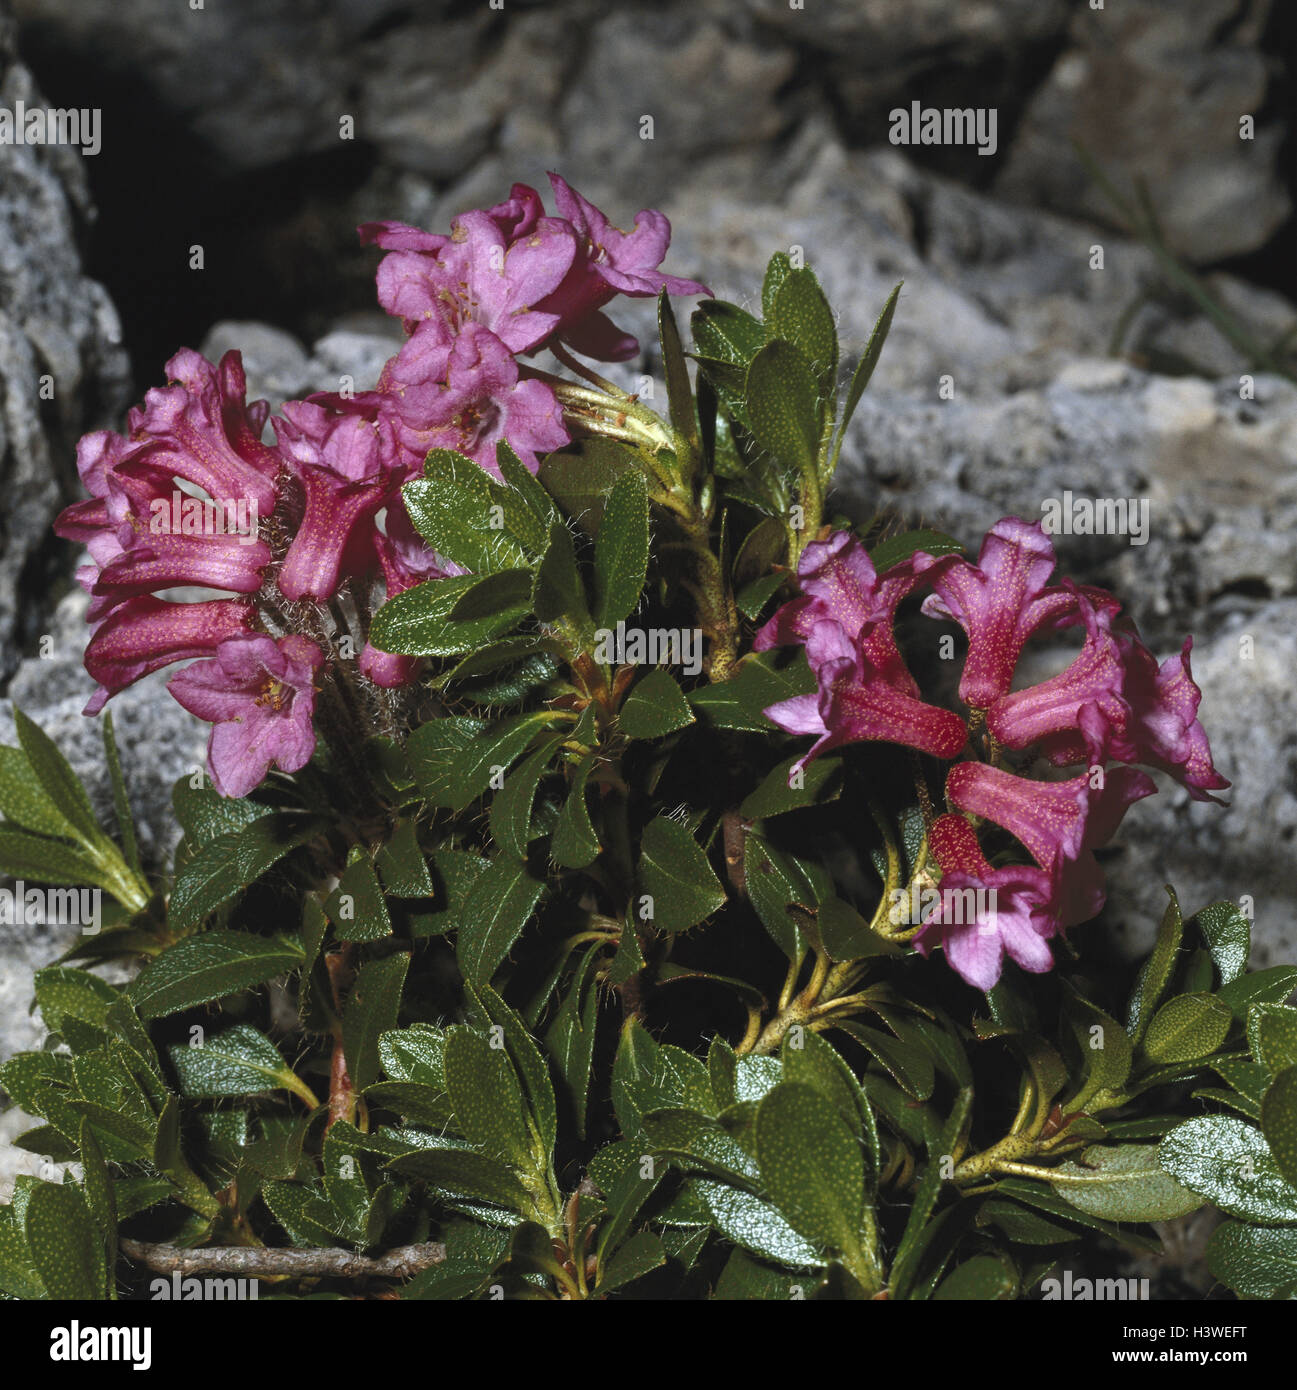 Bewimperte alpine rose, rhododendron hirsutum, nature, botany, flora, plants, flowers, Alpine flowers, Alpine flora, rhododendron, alpine rose, alp drunkenness, stone rose, hairy alpine rose, heather plants, Ericaceae, blossoms, blossom, red, period bloom Stock Photo